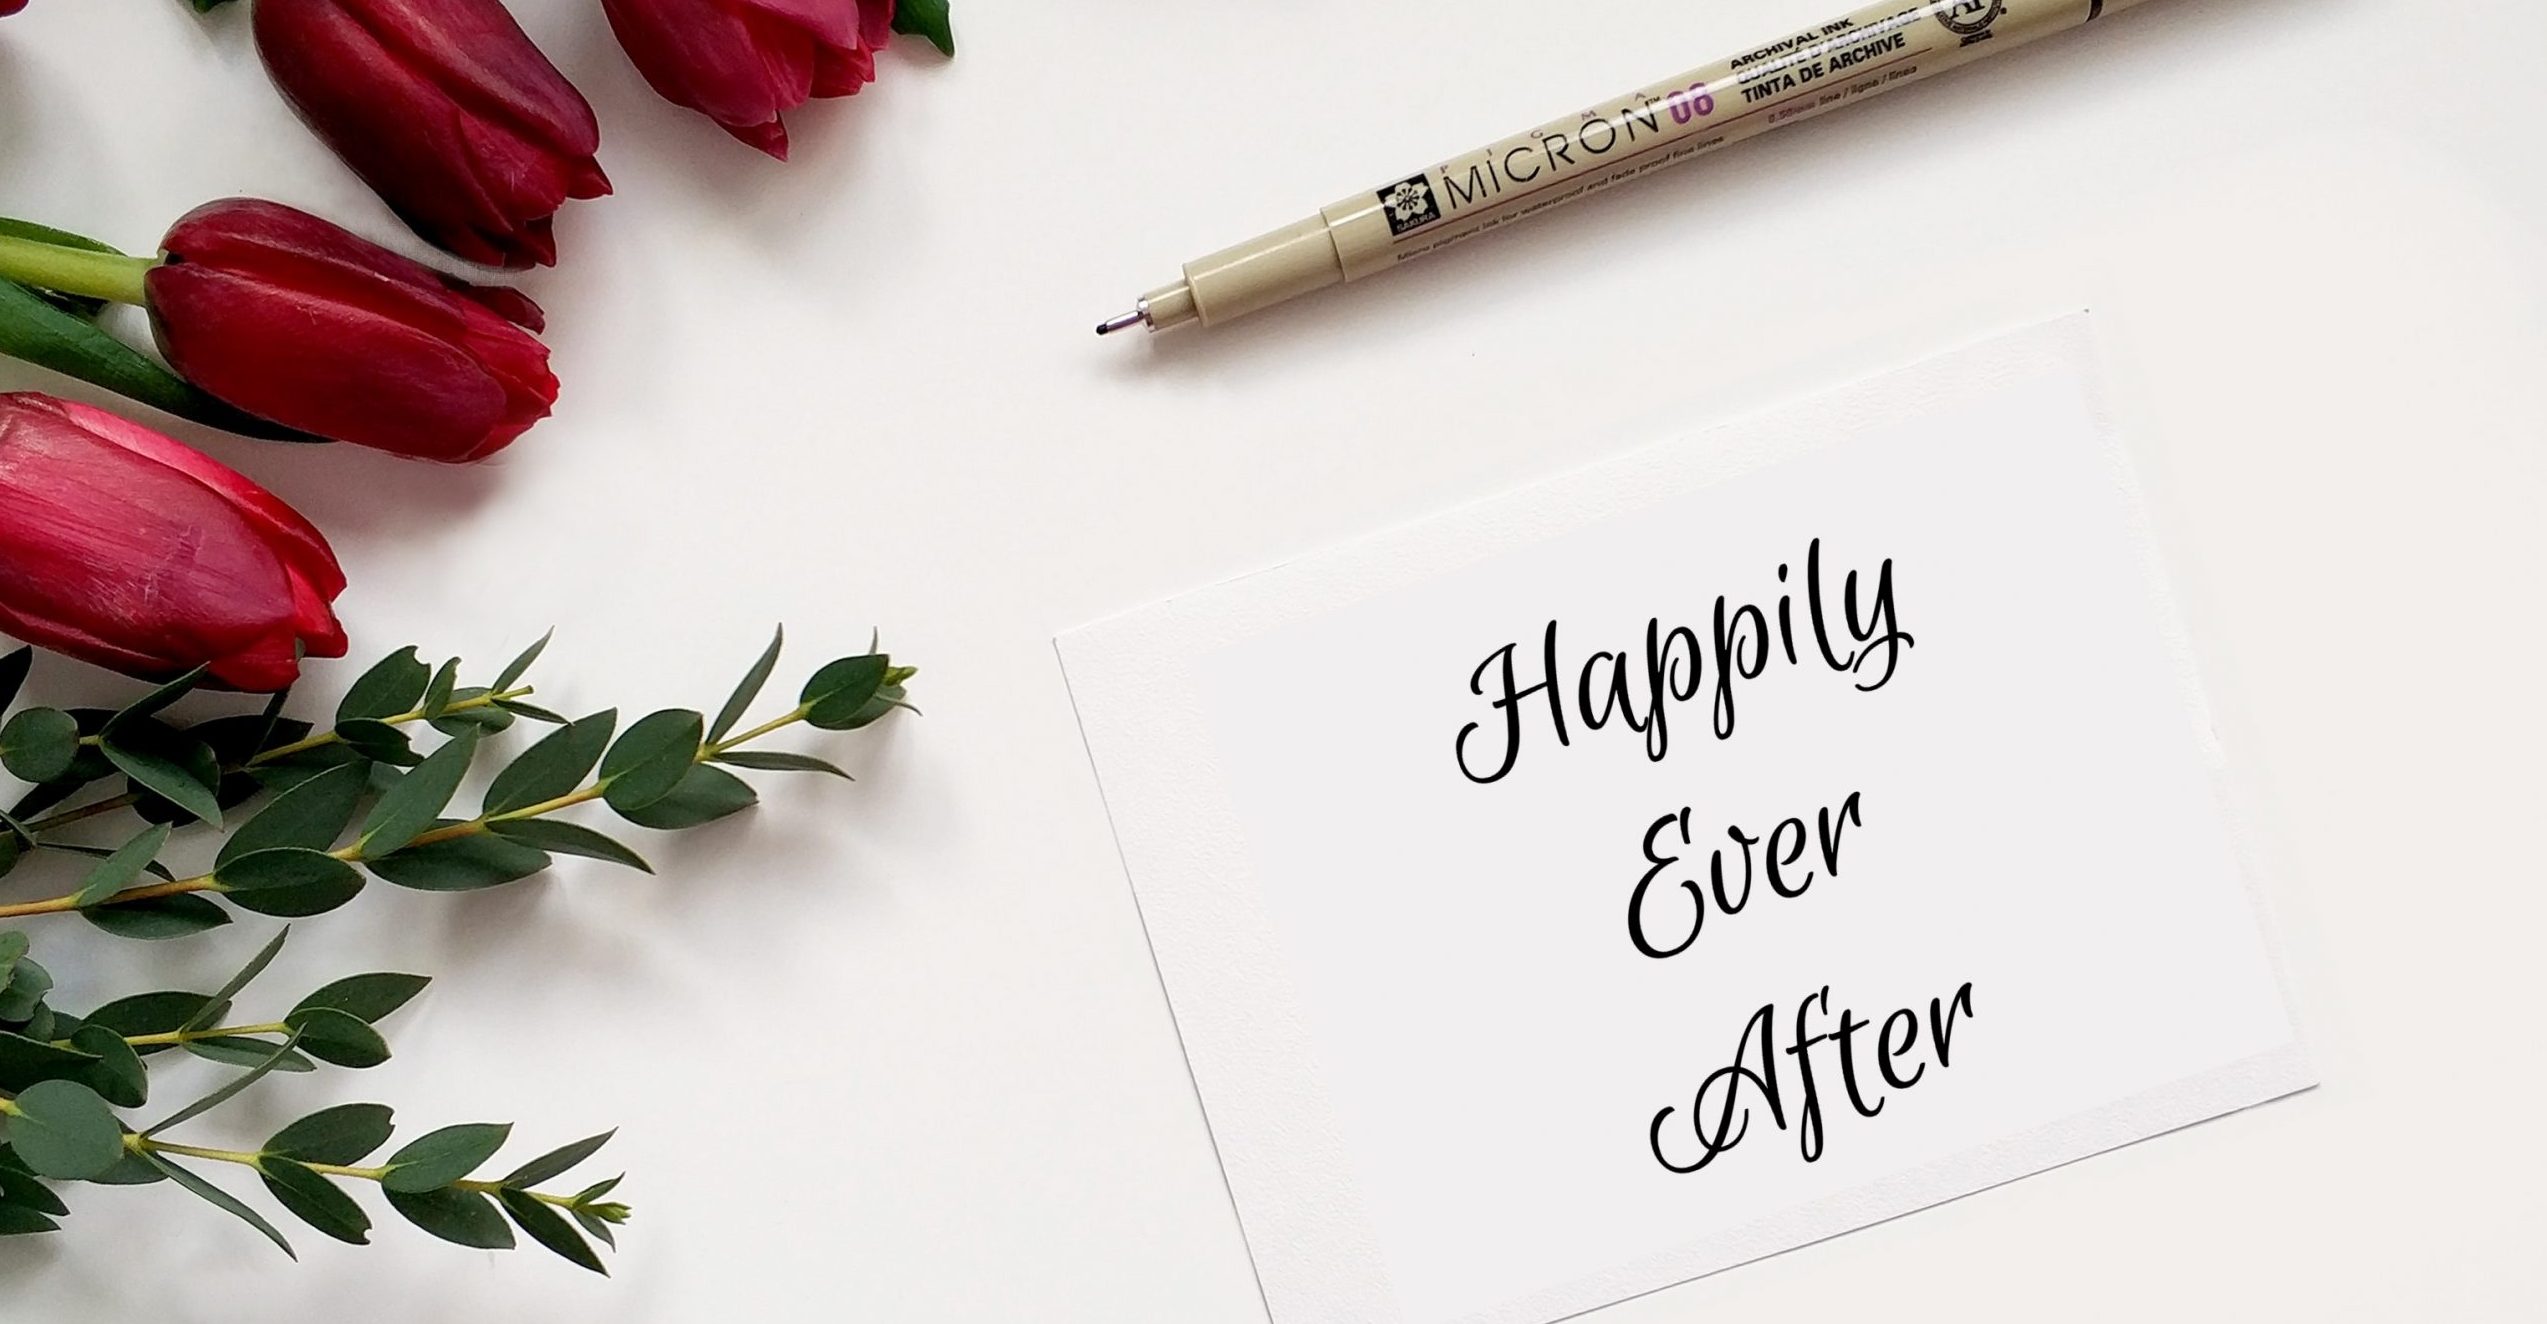 What to Write in a Wedding Card - Funny & Thoughtful Wedding Wishes